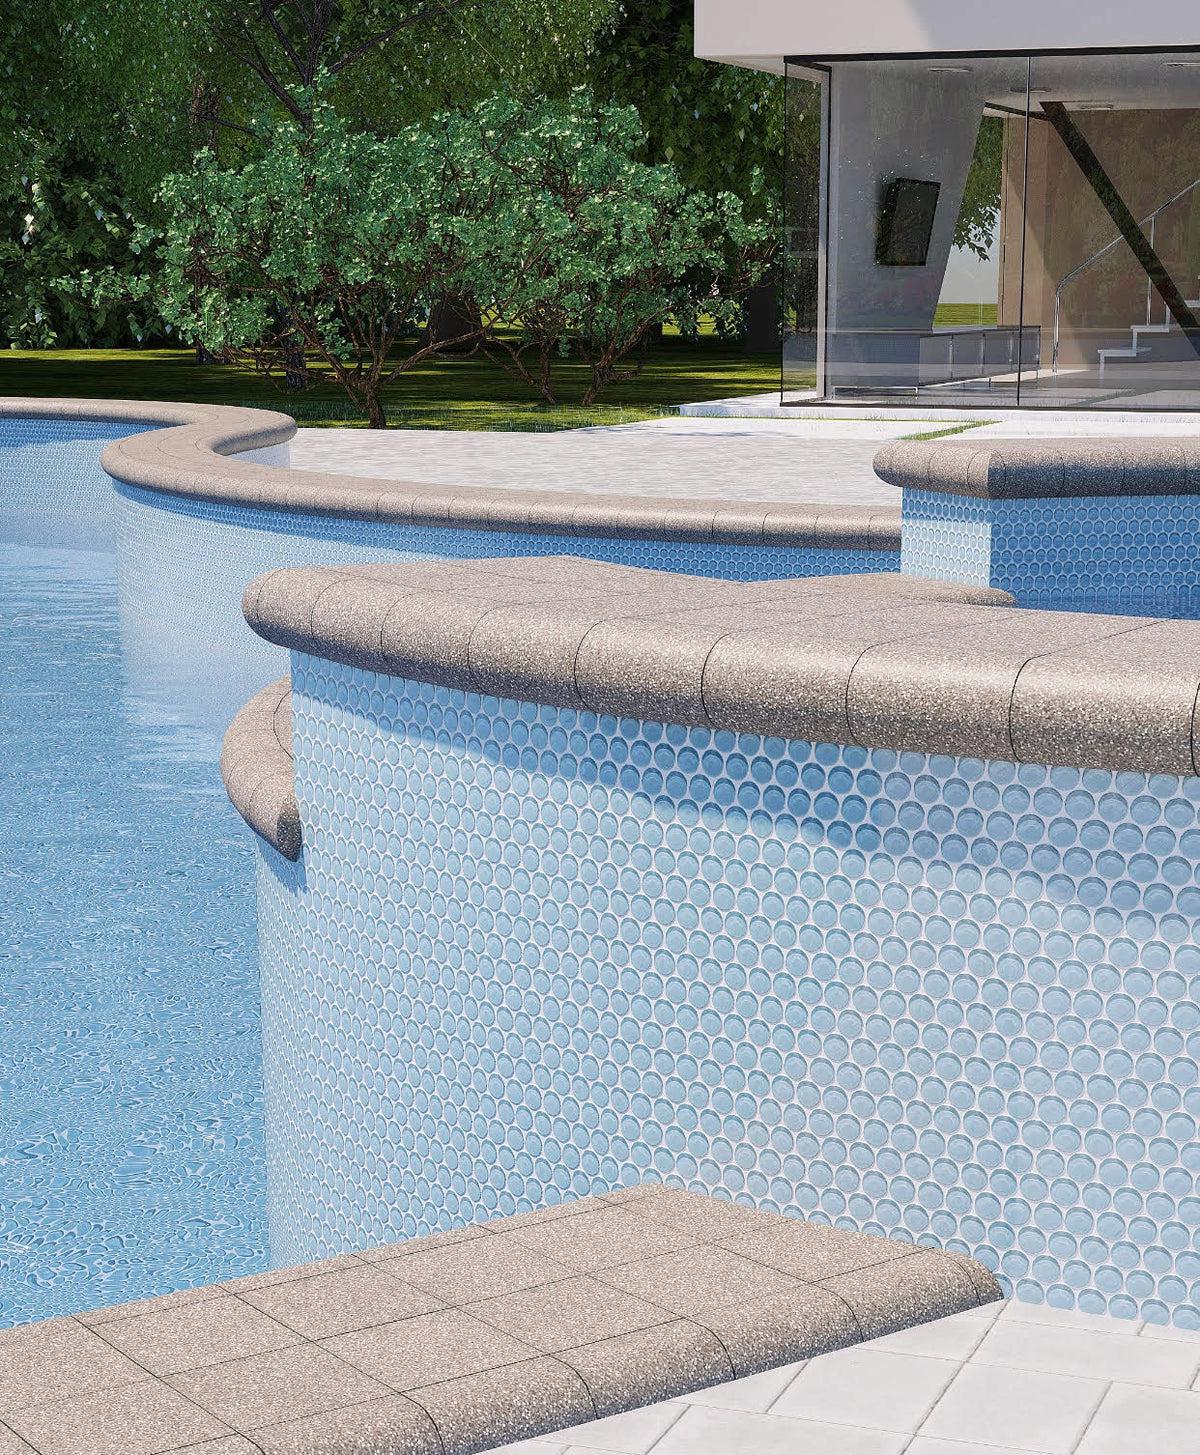 Sky Blue Penny Round Glass Tiled Pool and Jacuzzi Insert